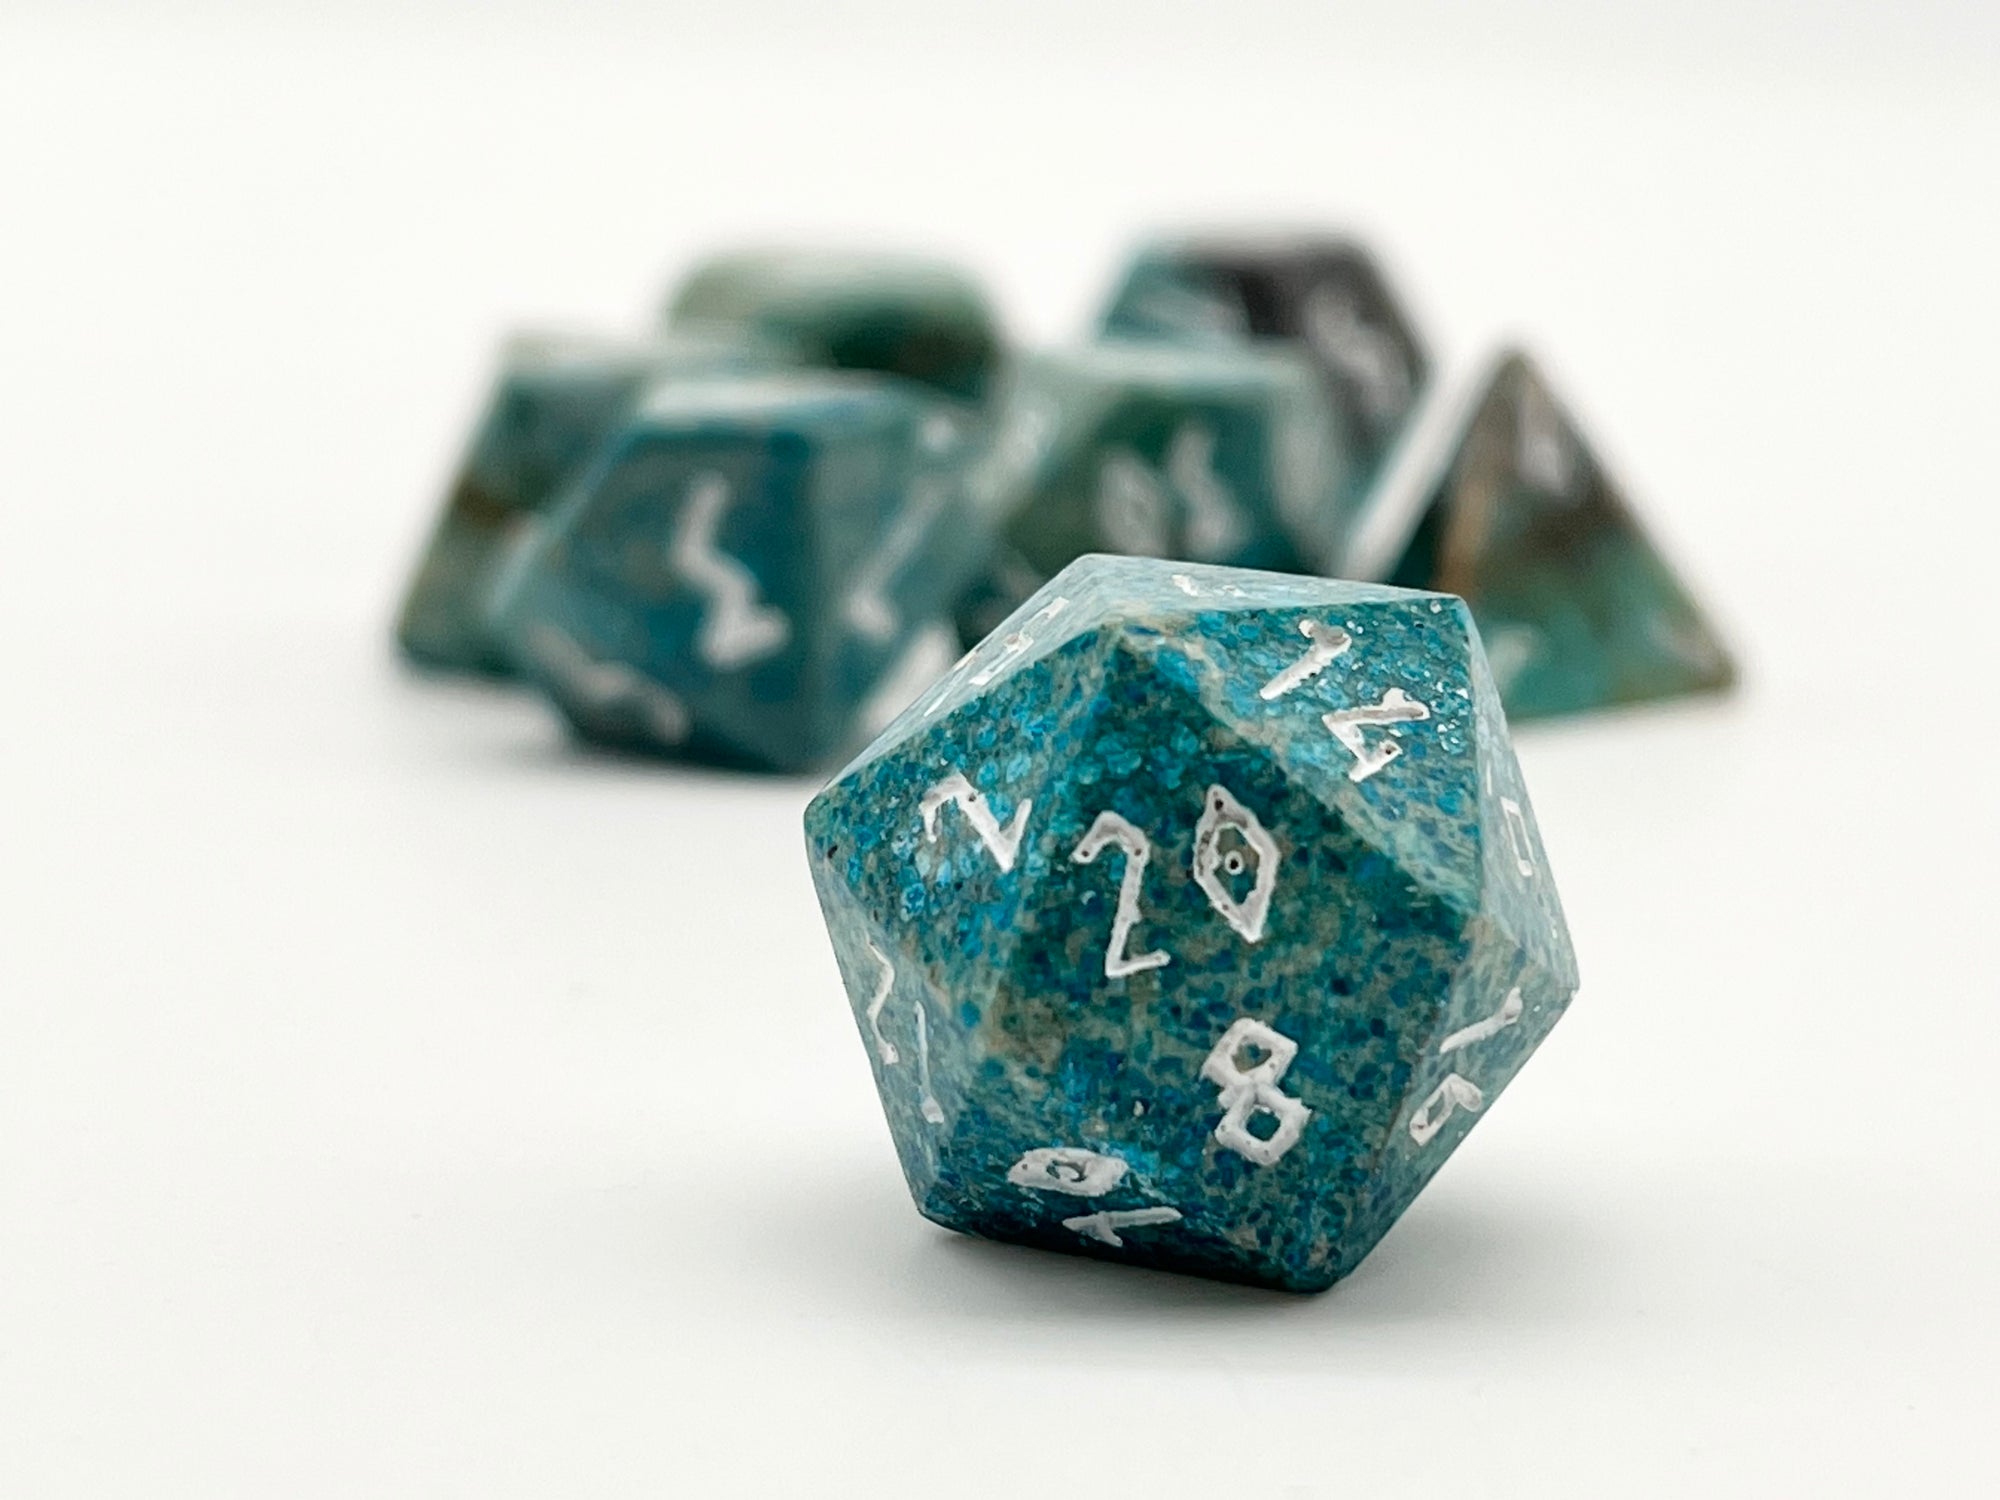 Turquoise Blue Coral Fossil - 7 Piece RPG Set Gemstone Dice